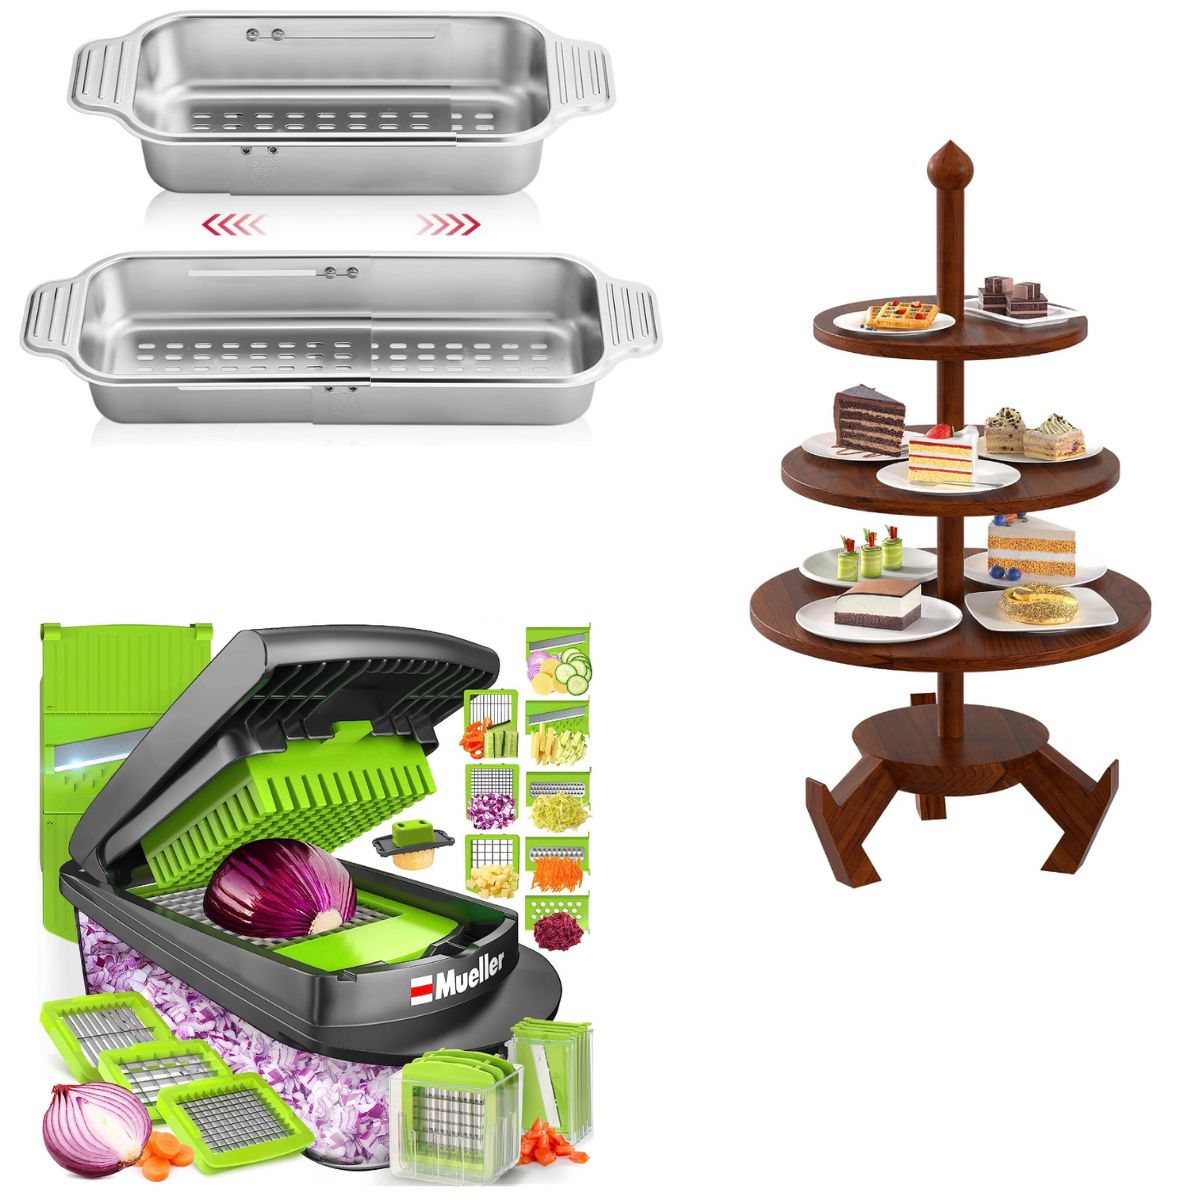 Expandable colander $11+, Mueller Pro series chopper $23+, Wooden food  display stand $14+